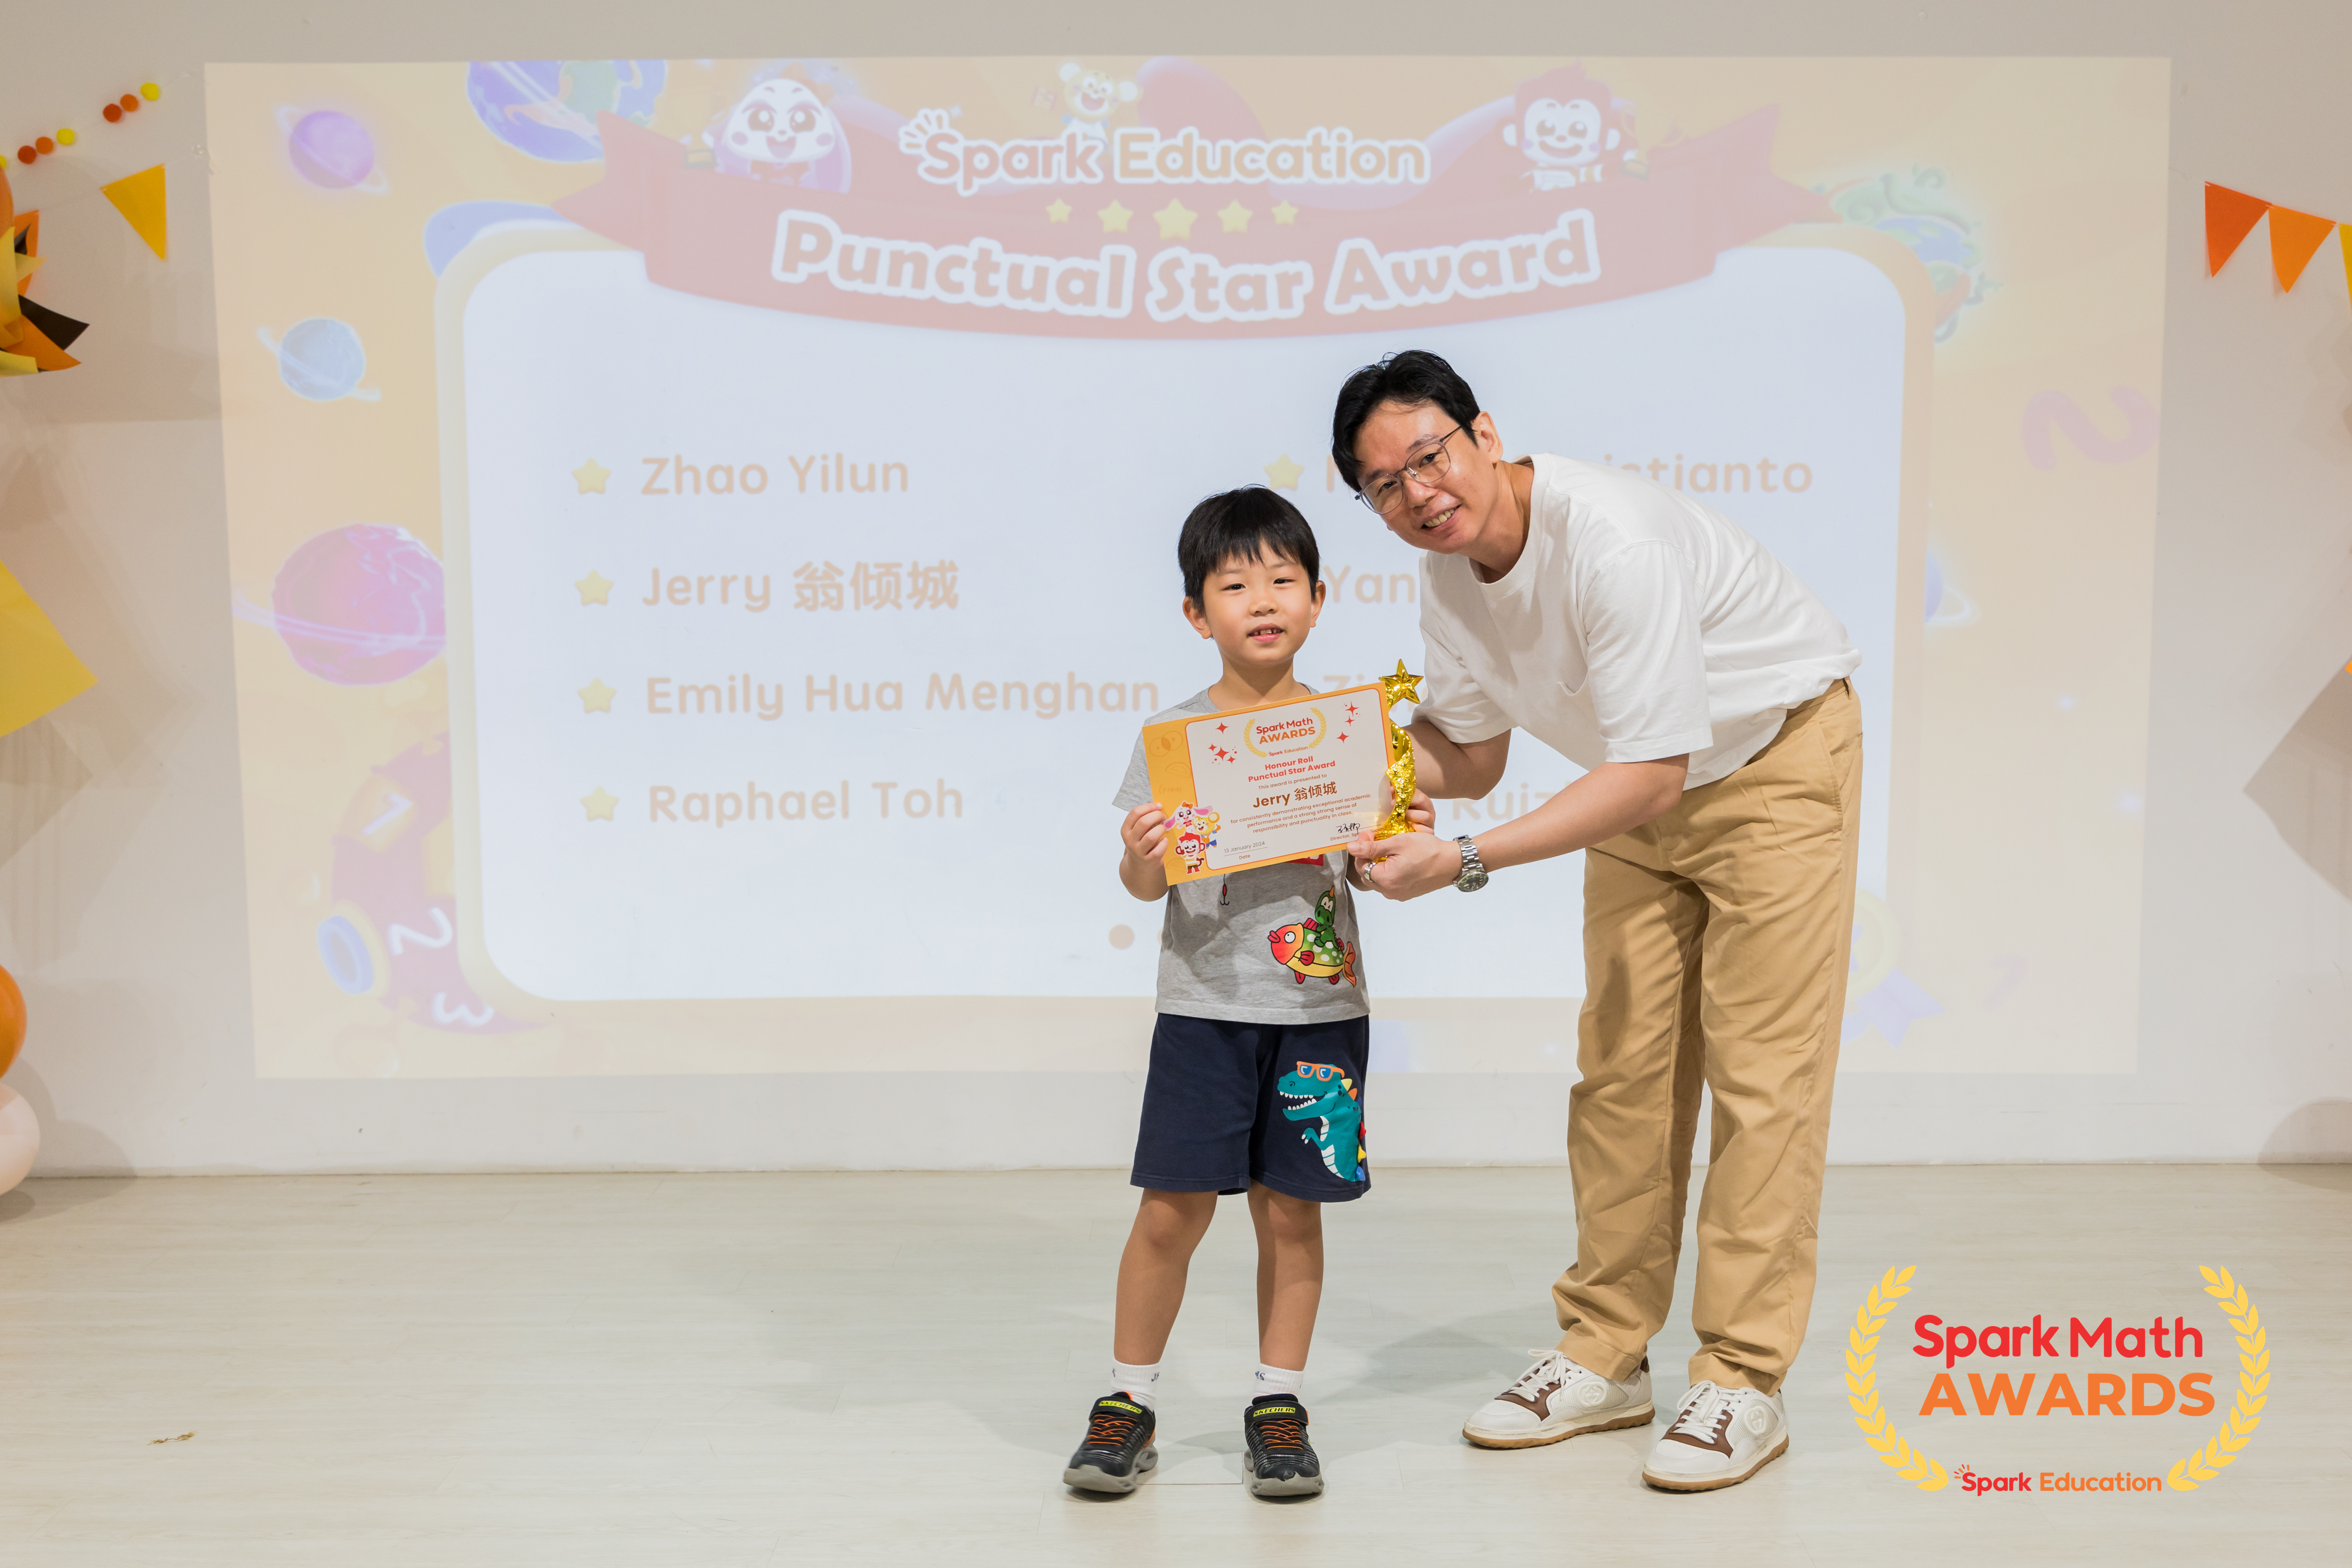 Teacher Roy, Upper Primary Curriculum Specialist, presenting the Honour Roll and Punctual Star awards to top performing Spark Math winners who have shown a great sense of responsibility and punctuality in all their learning activities.